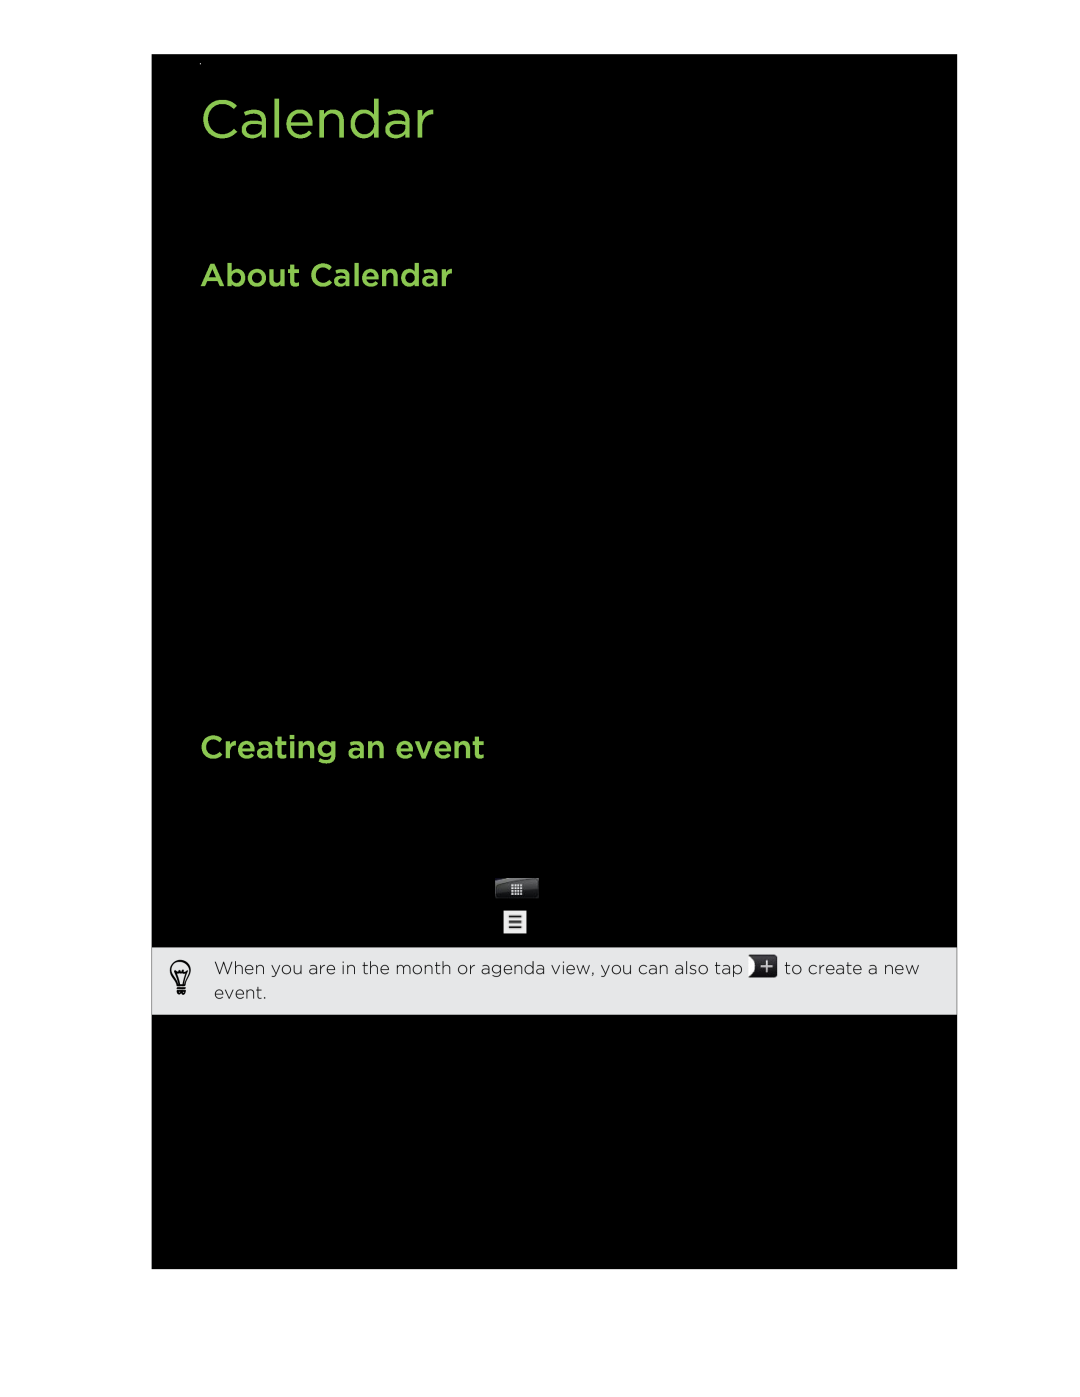 HTC S manual About Calendar, Creating an event 